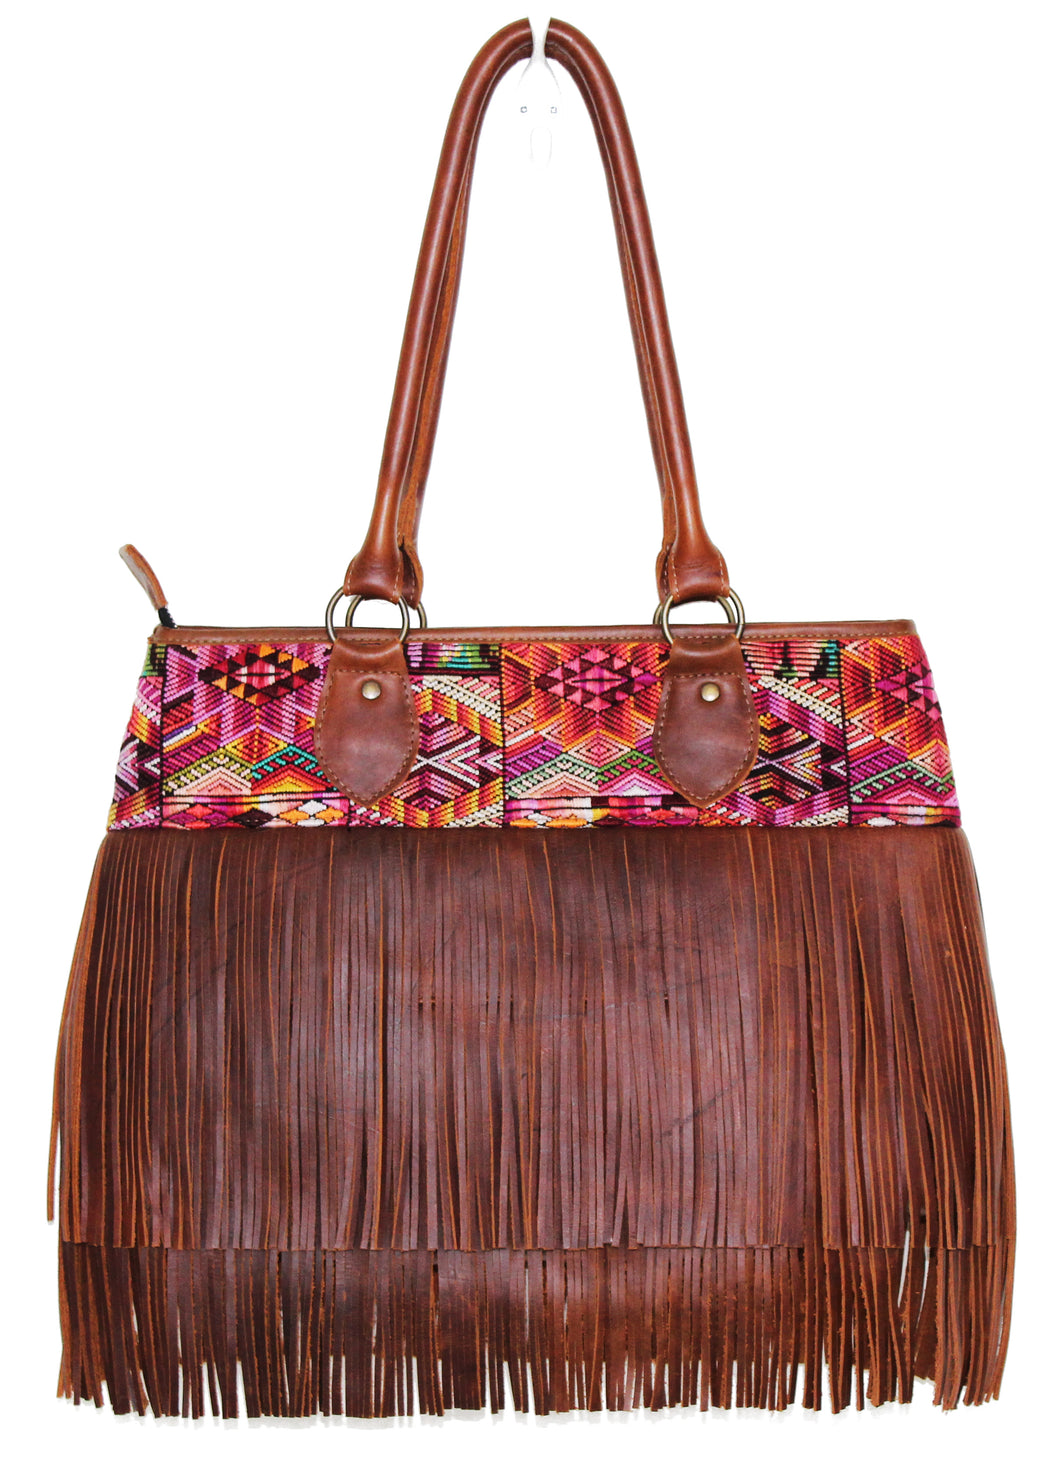 MoonLake Bags Ethical Fashion Brand medium DEDE fringe over the shoulder bag in dark tan leather and handwoven geometric huipil